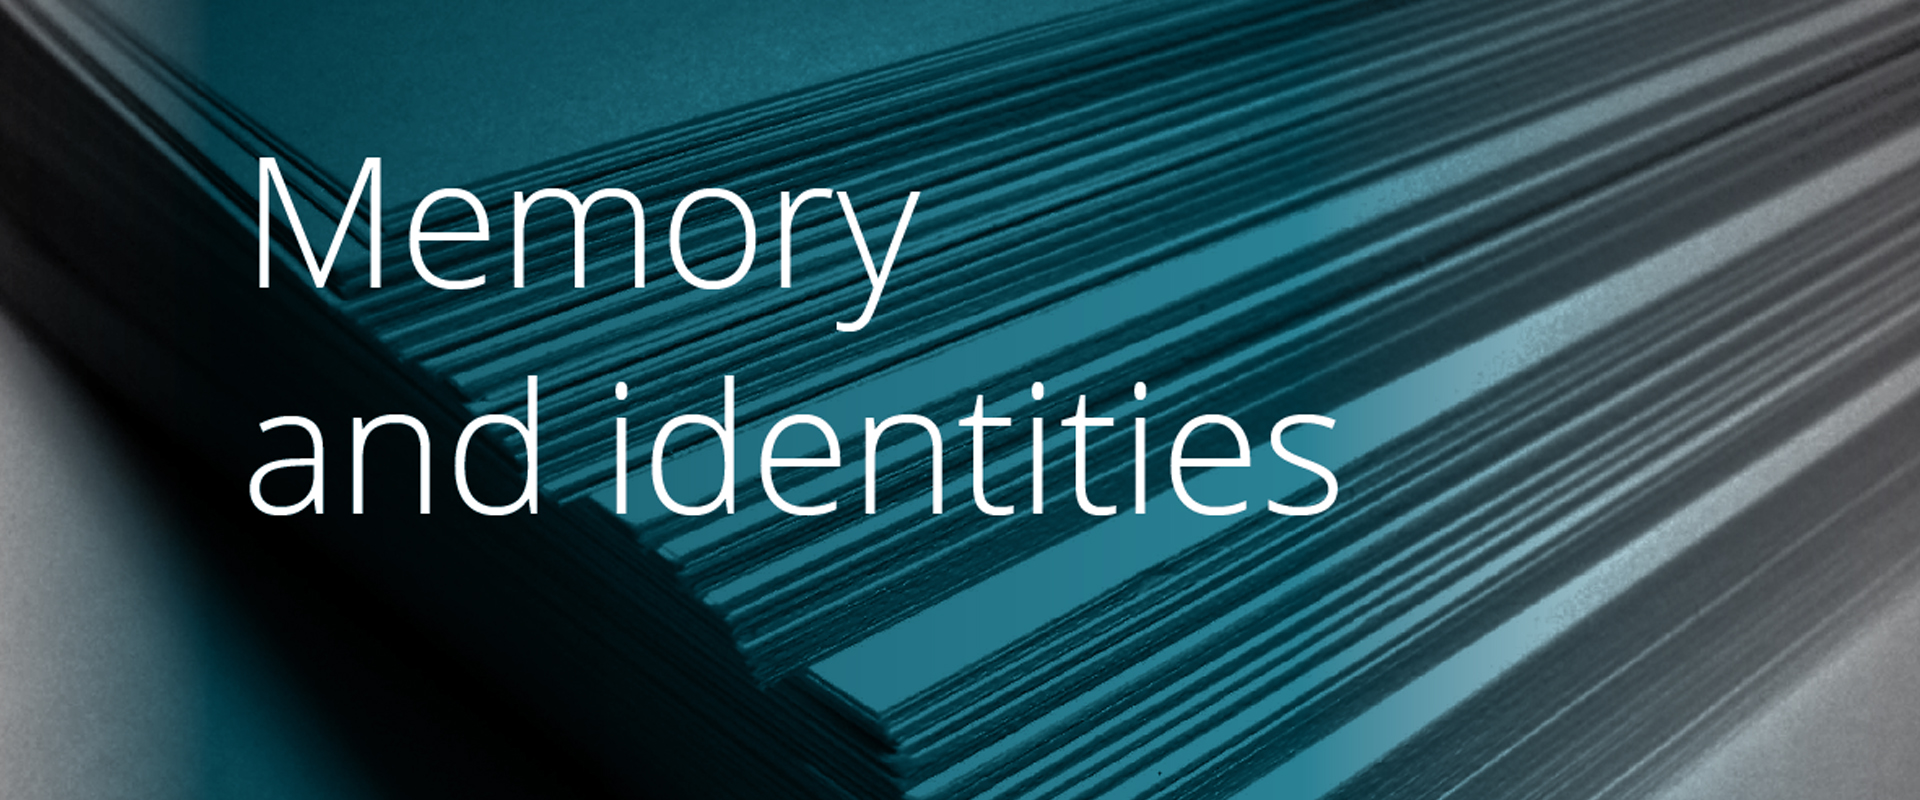 Memory and identities